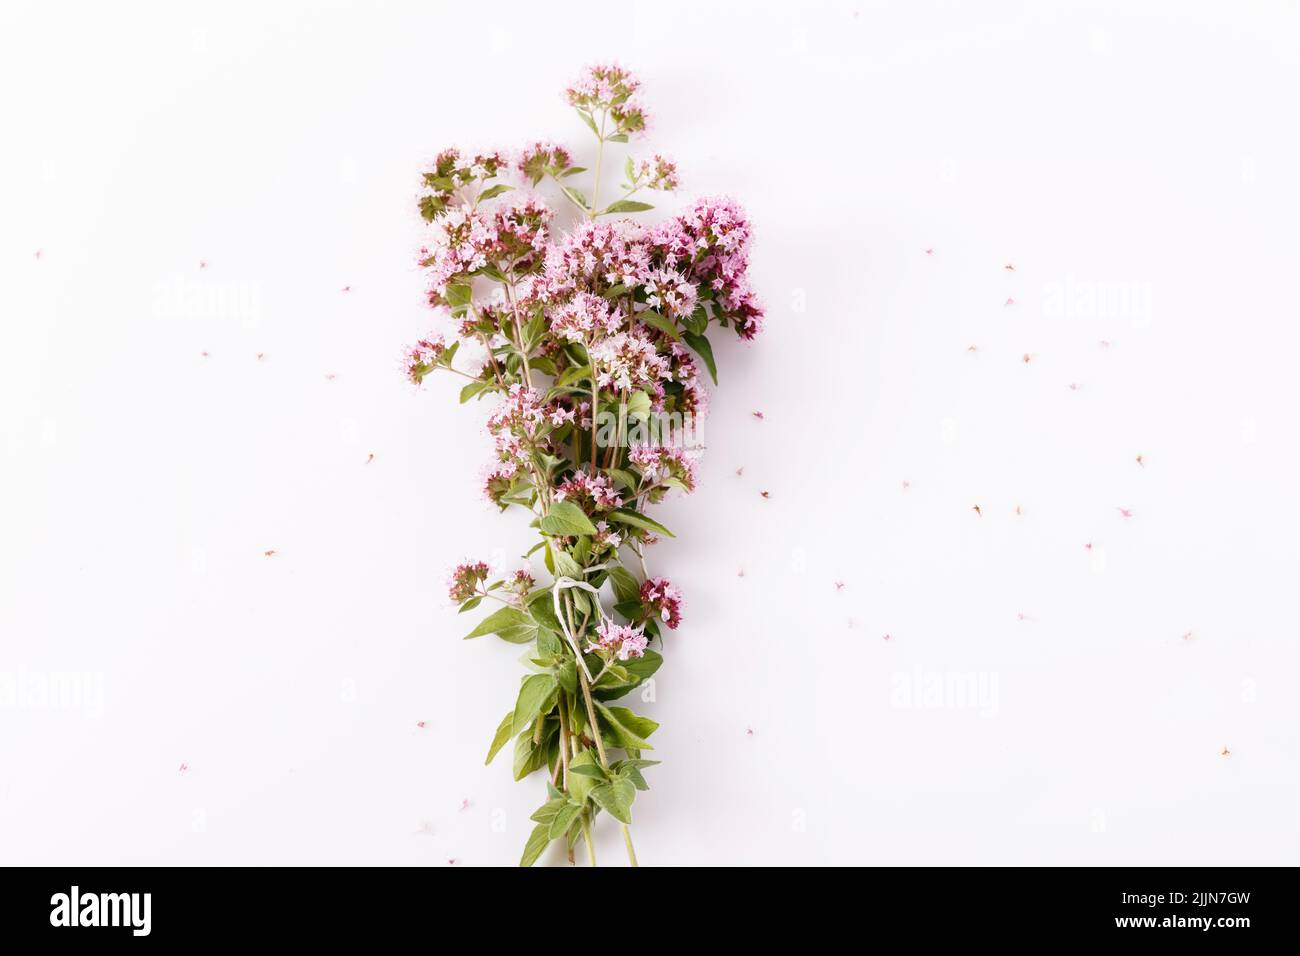 Oregano flowers and leaves bunch on white background . Top view, flat lay. Flowering marjoram creative composition. Stock Photo